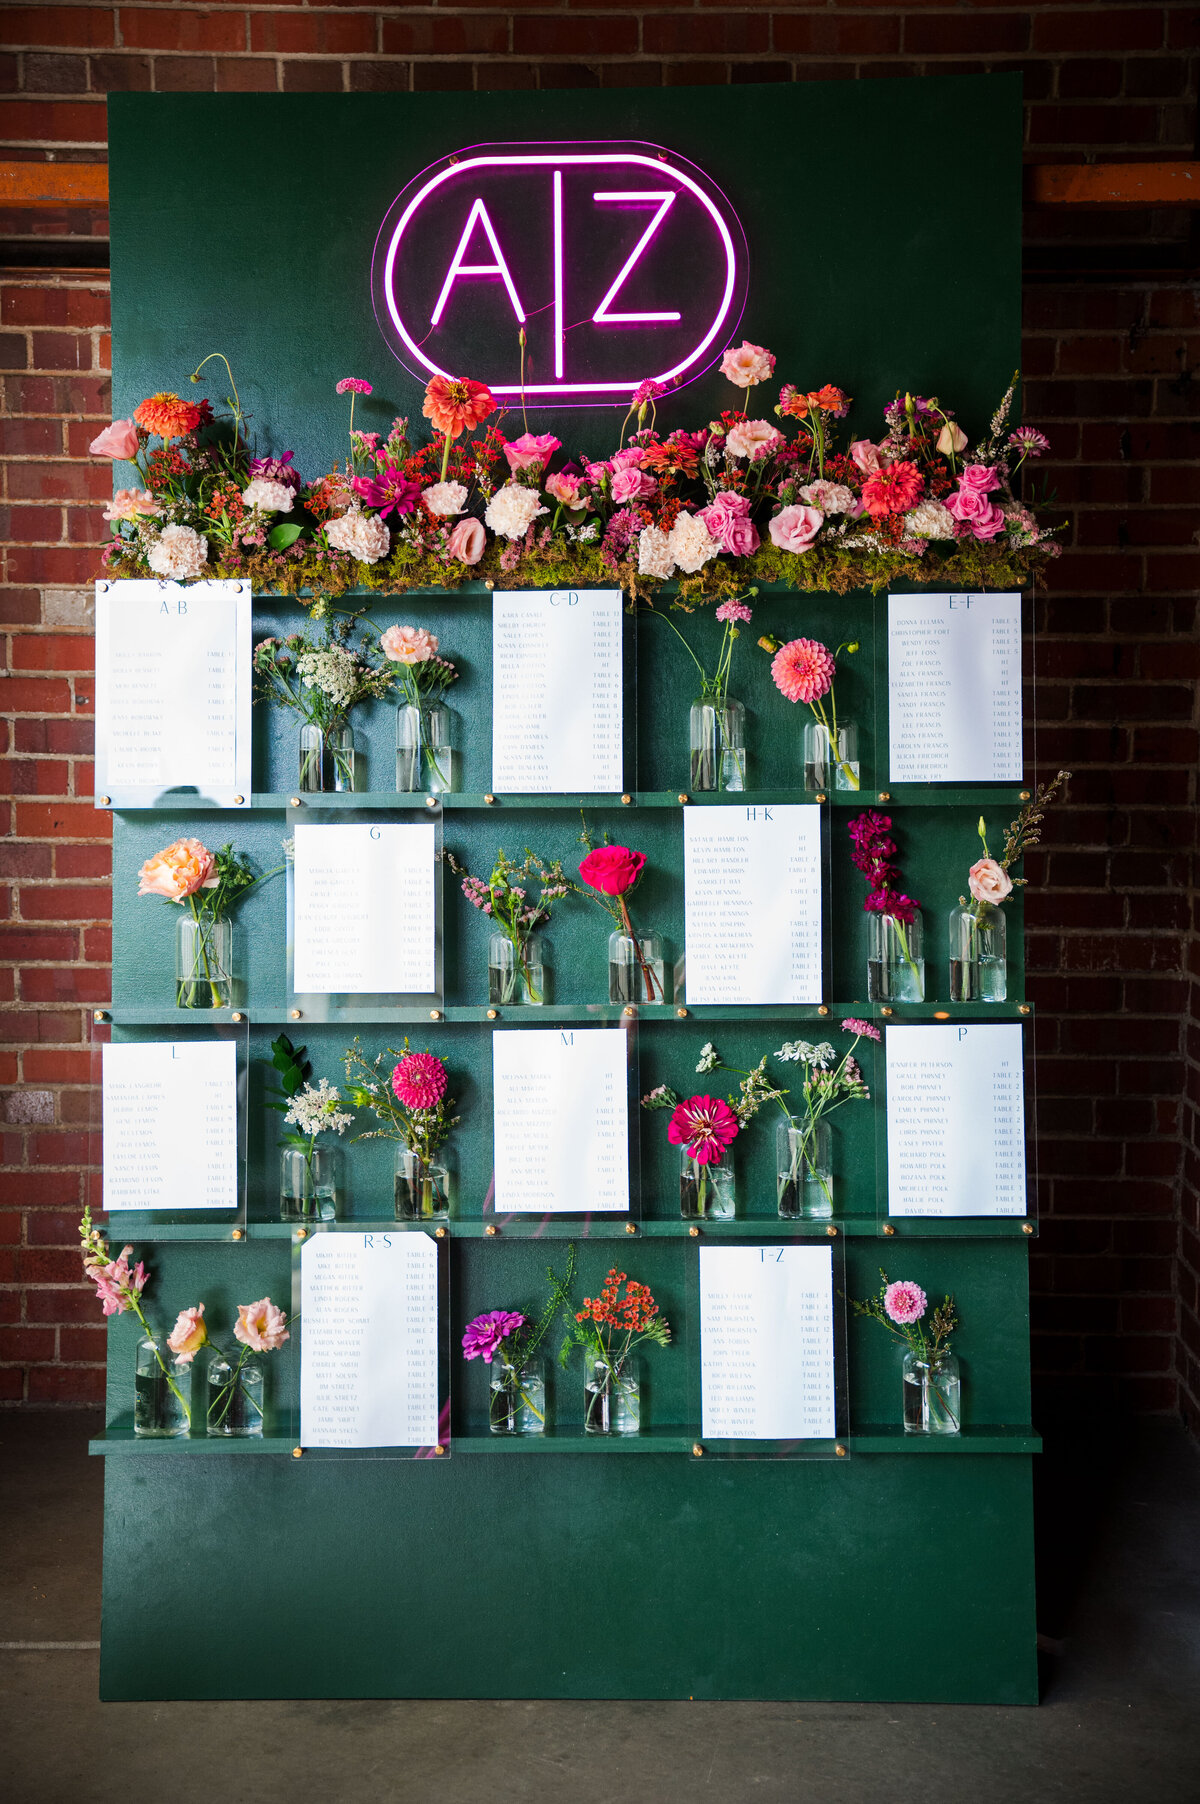 A unique seating chart is adorned with various colored wild flowers and a neon letter sign reading "A|Z."